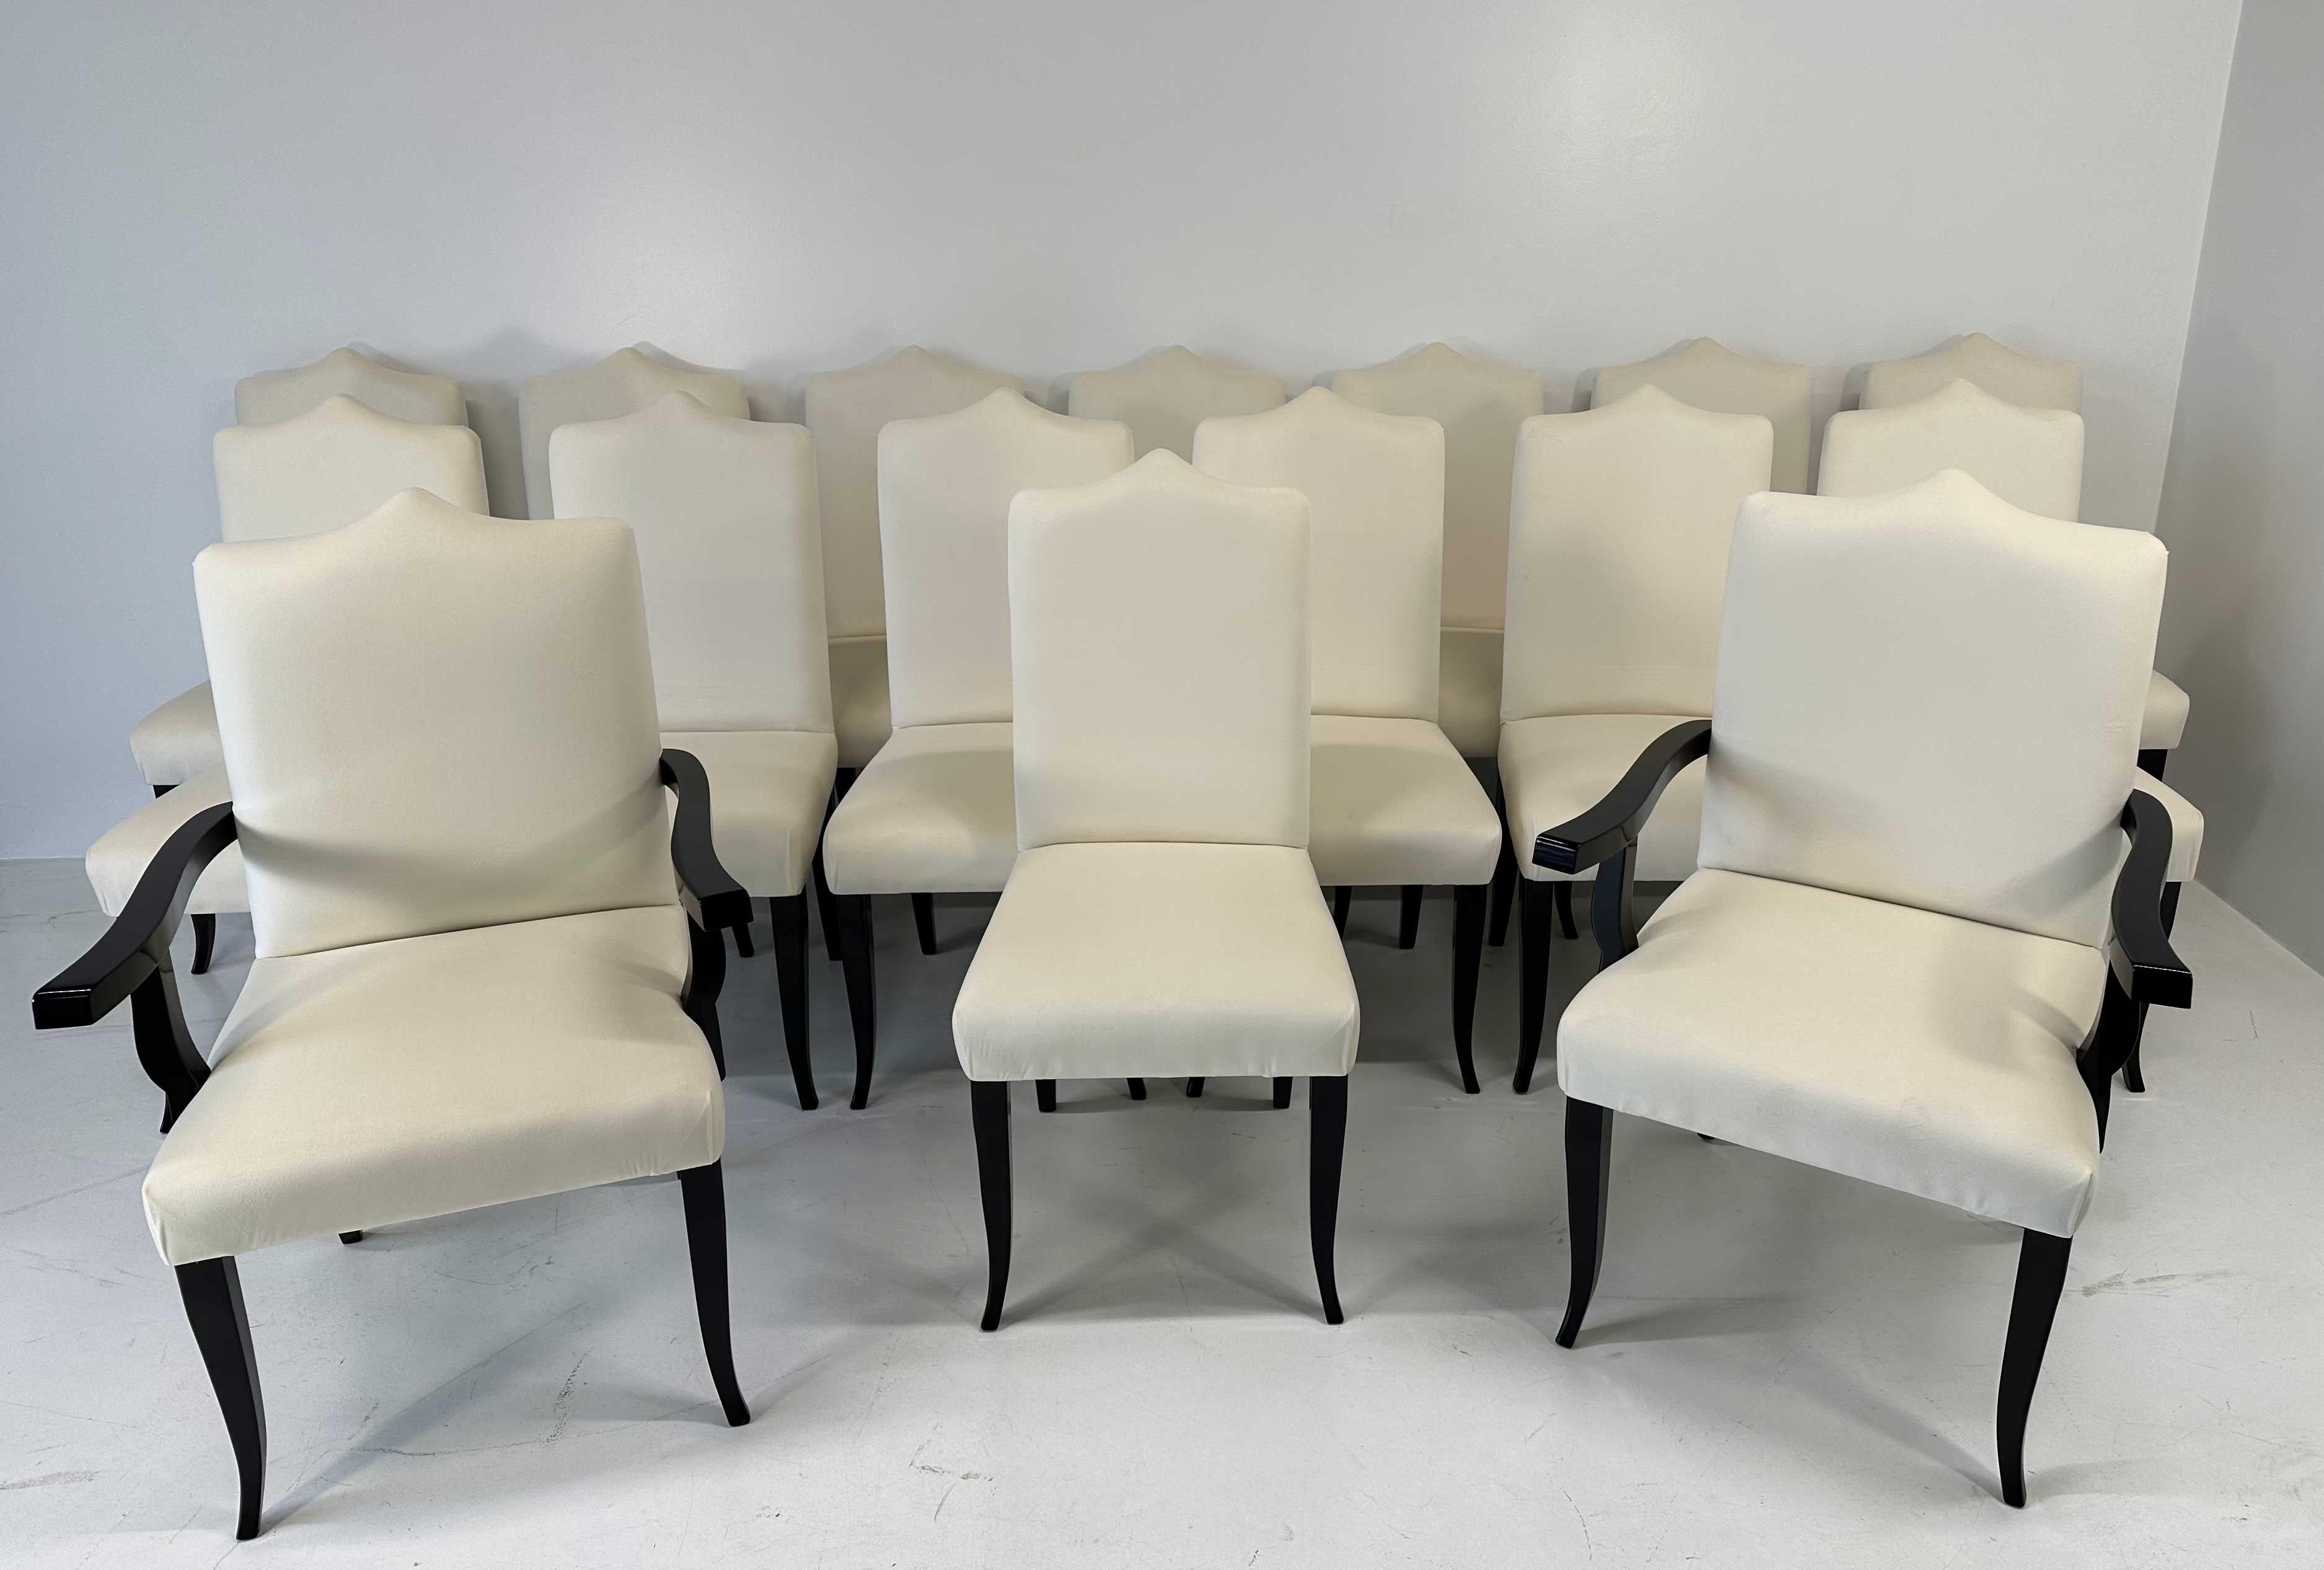 This set of 16 Art Deco style chairs is actually composed by 14 chairs and 2 thrones (chairs with arms for the heads of the table) . They were produced in the north of Italy in the 1980s. 
They are completely covered in an high quality cream velvet